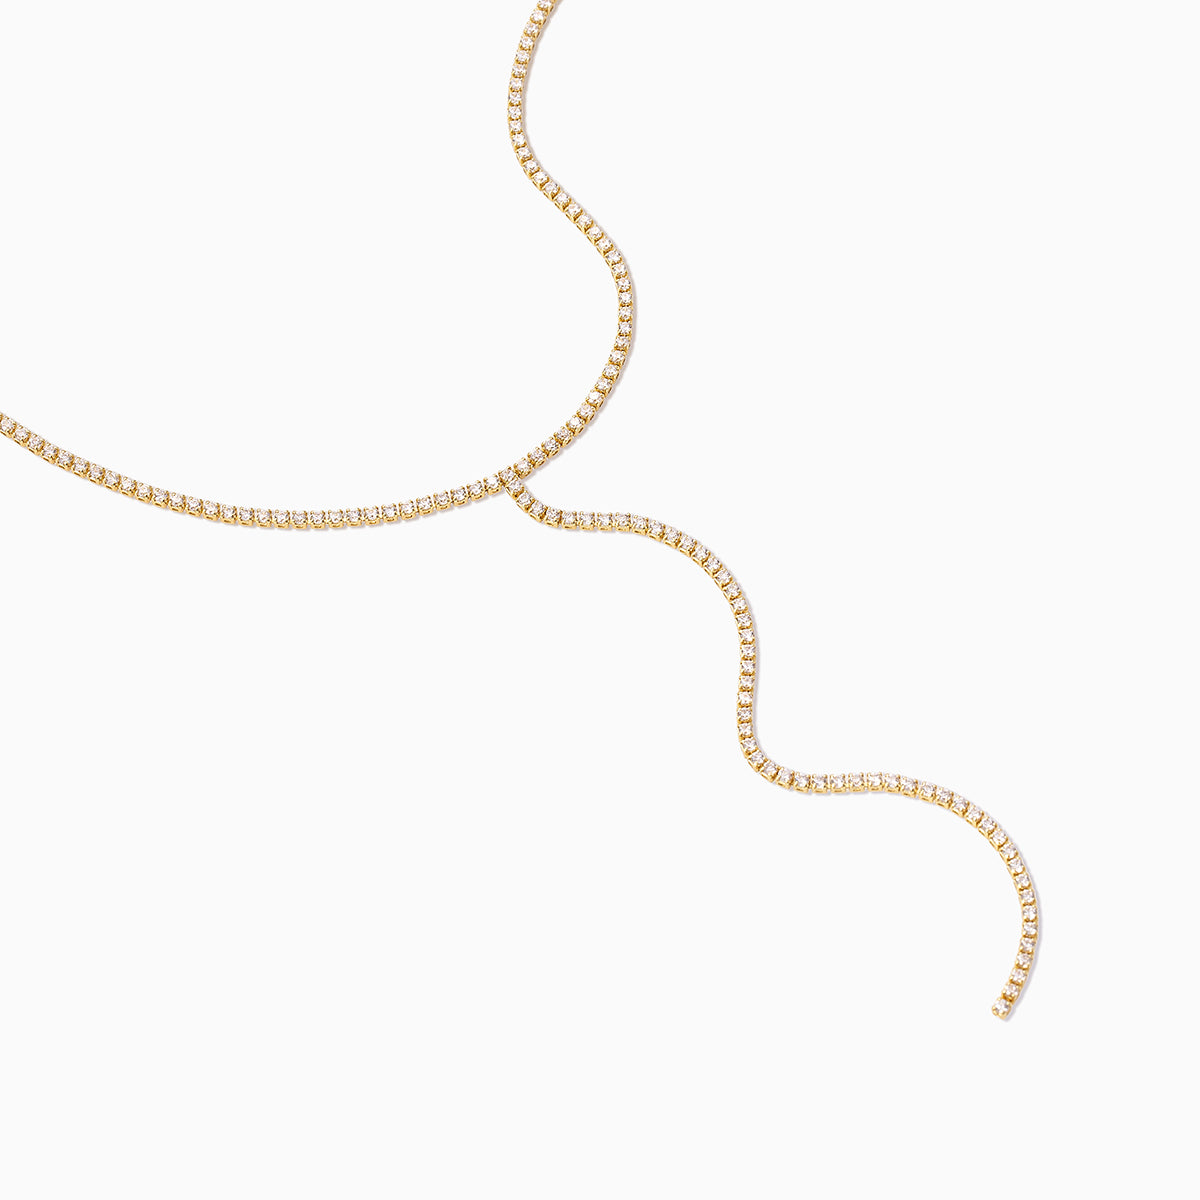 Glam Lariat Necklace | Gold | Product Detail Image | Uncommon James